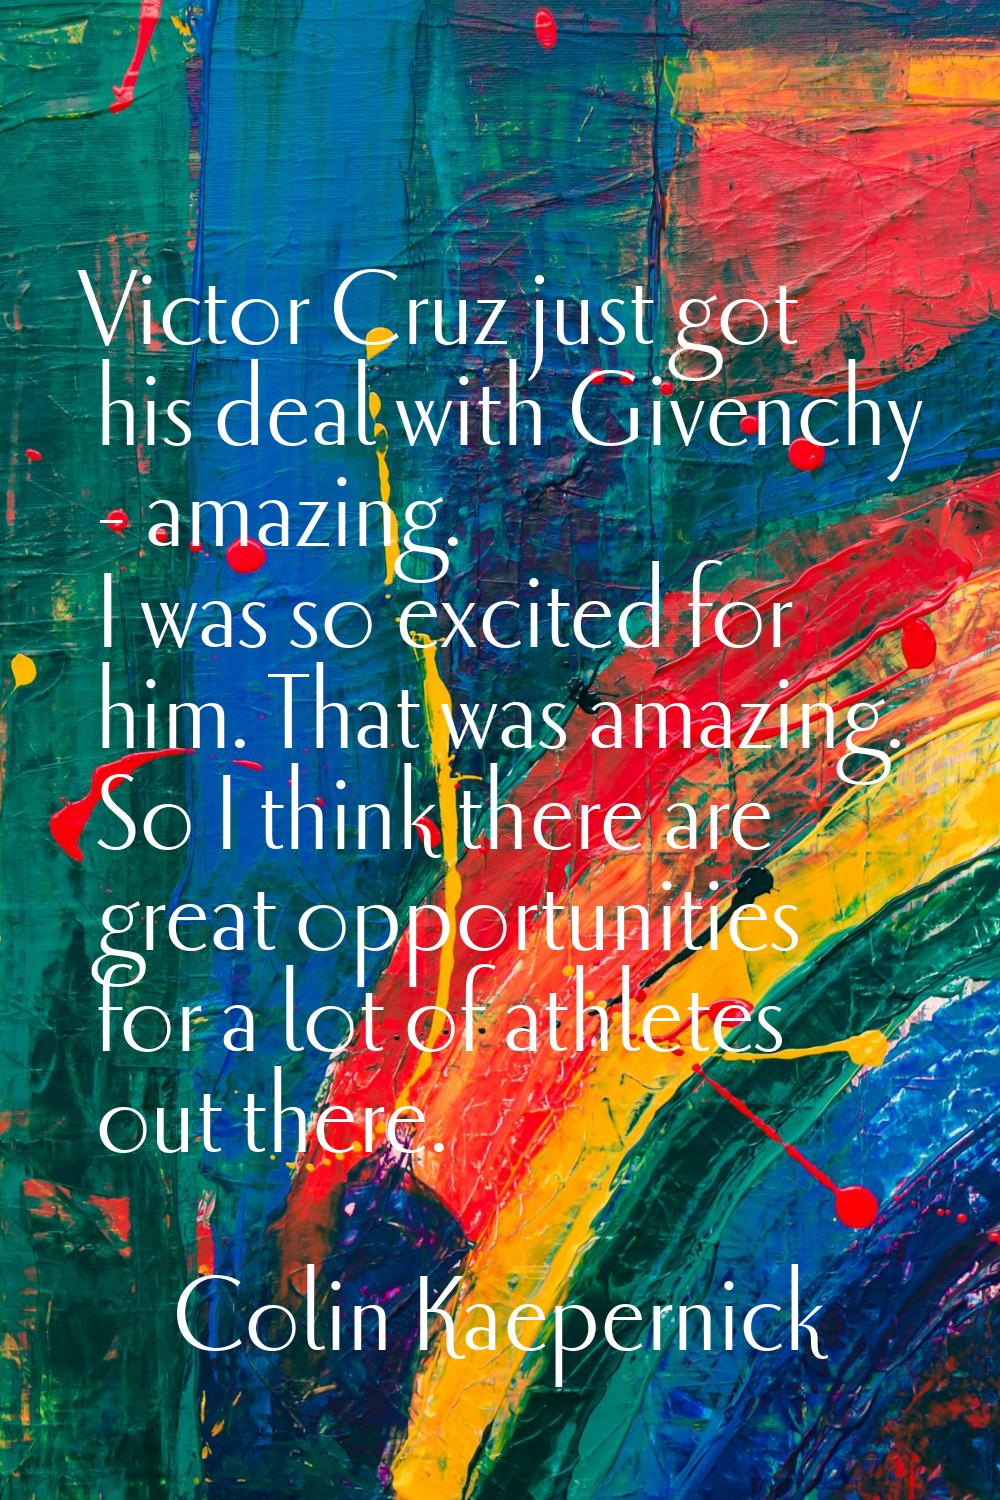 Victor Cruz just got his deal with Givenchy - amazing. I was so excited for him. That was amazing. 